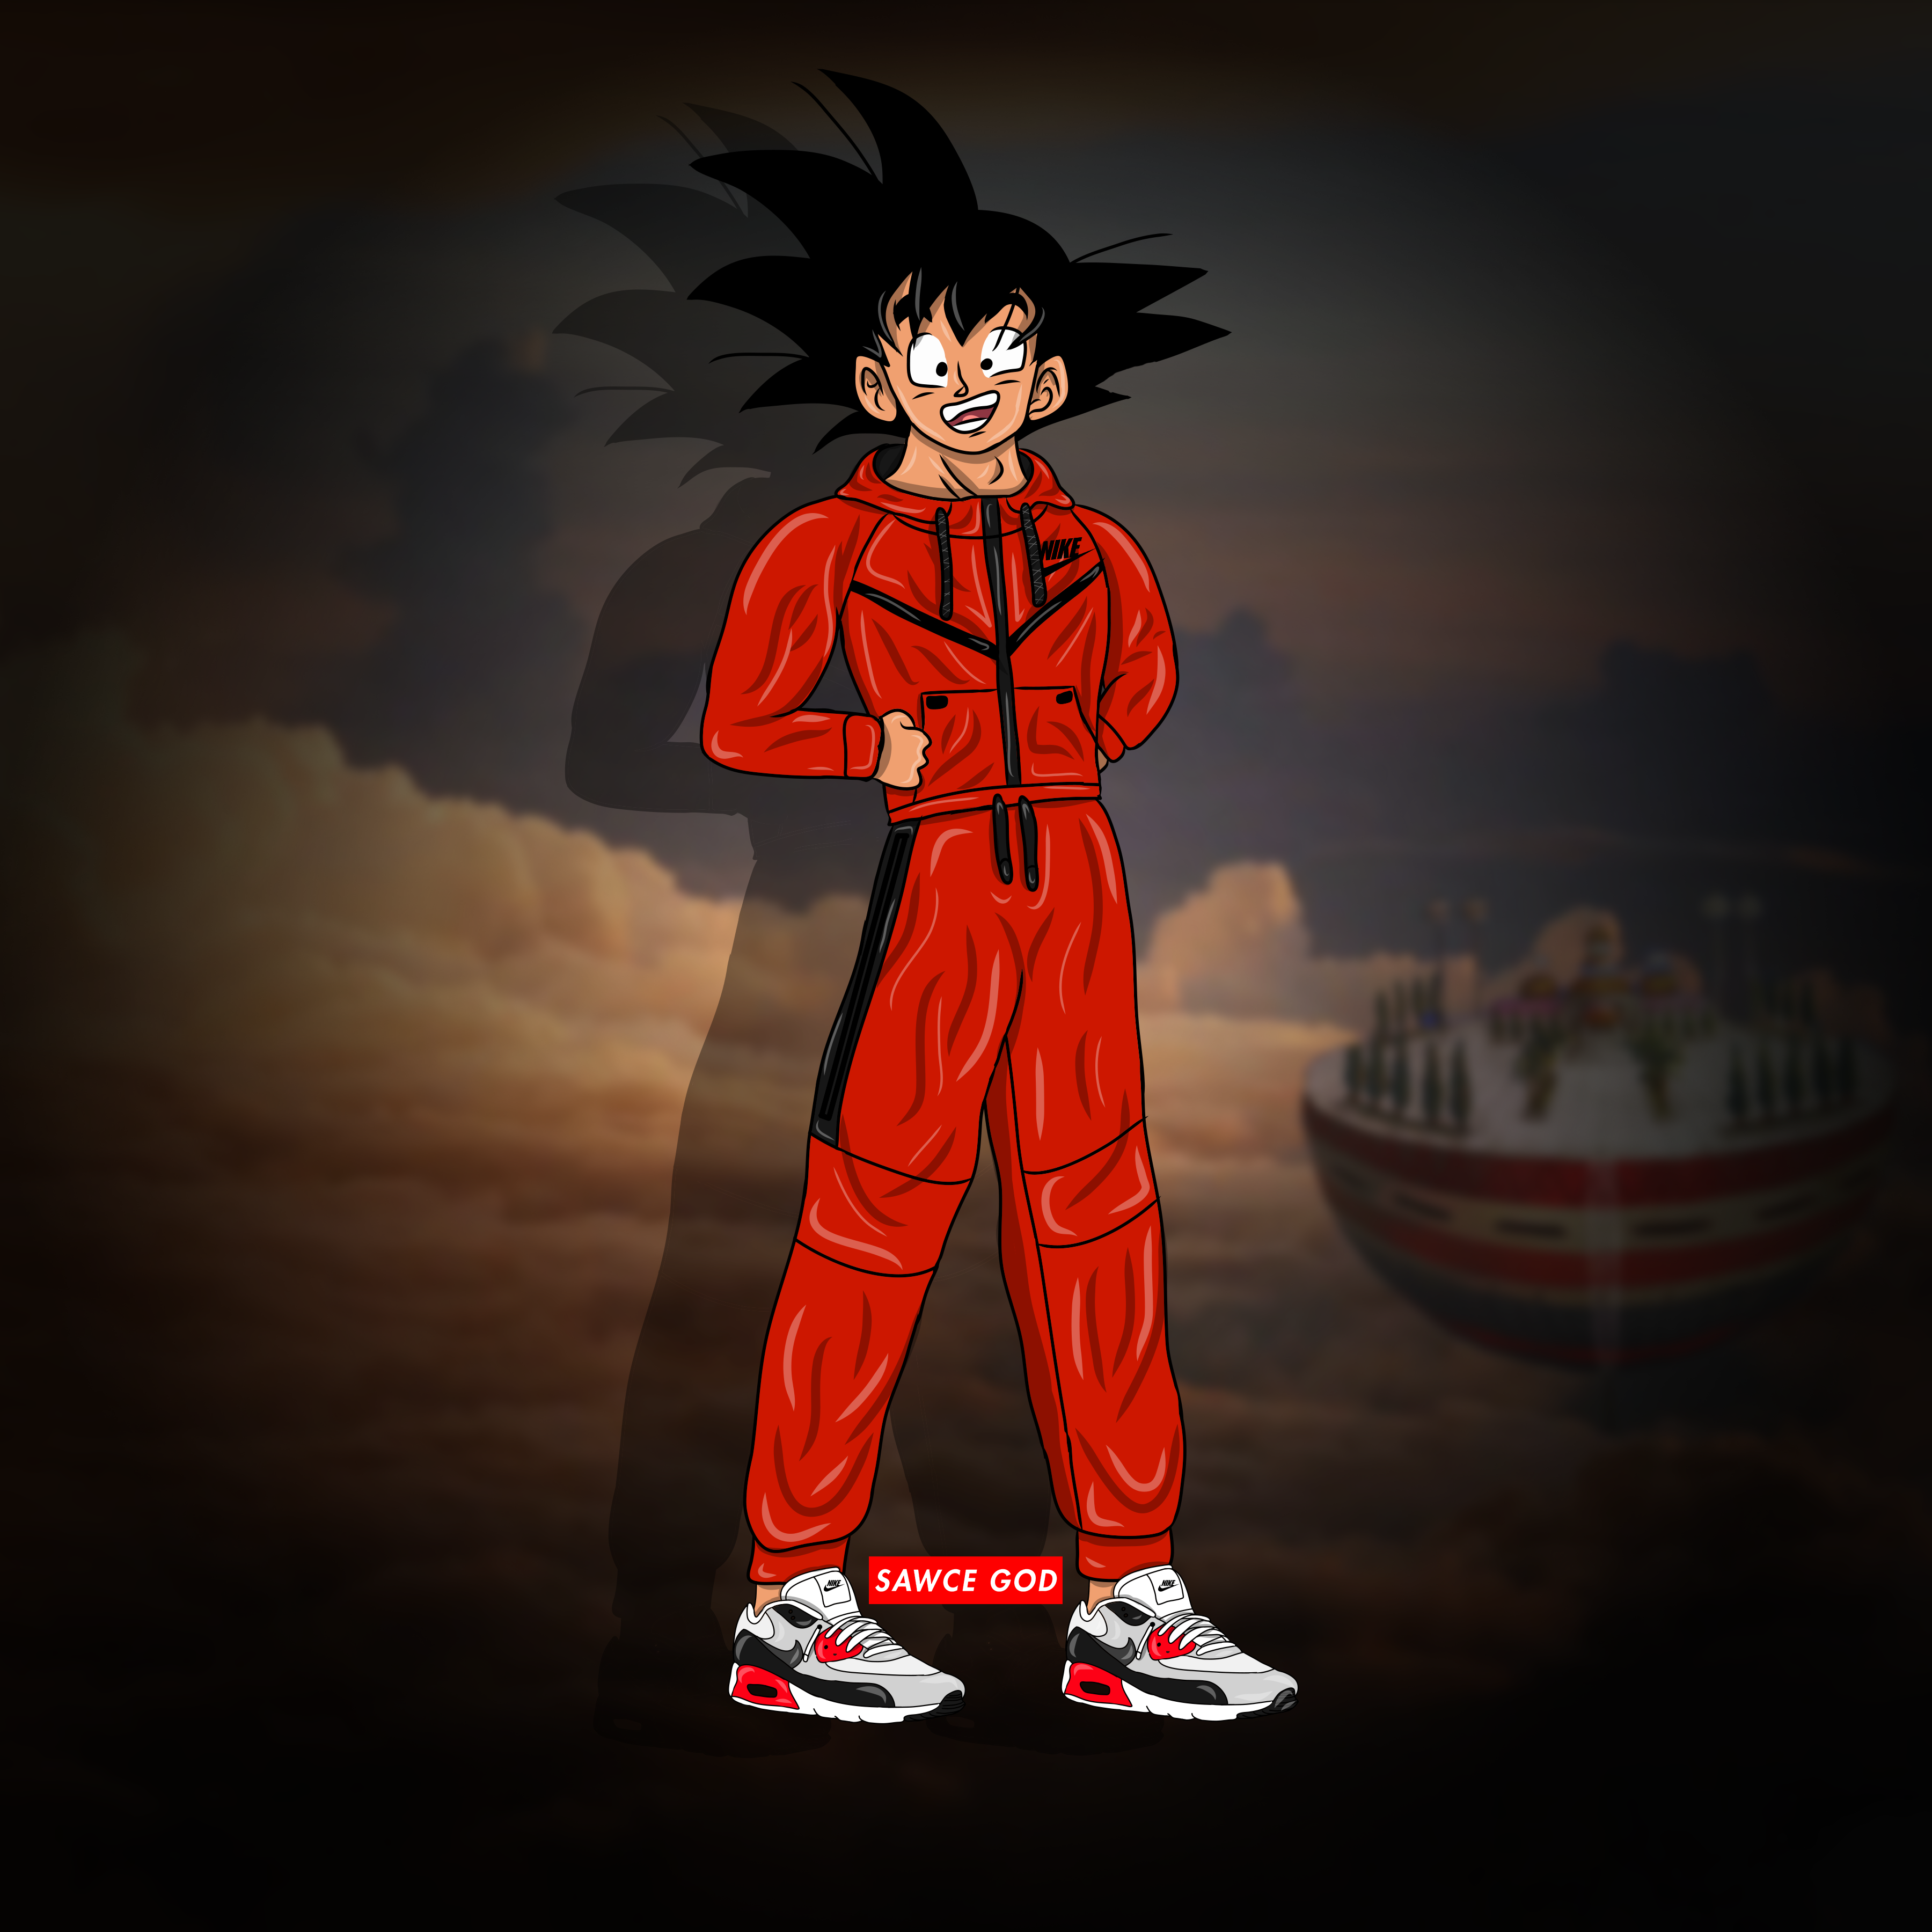 Goku Nike air 90 by fragmentface on